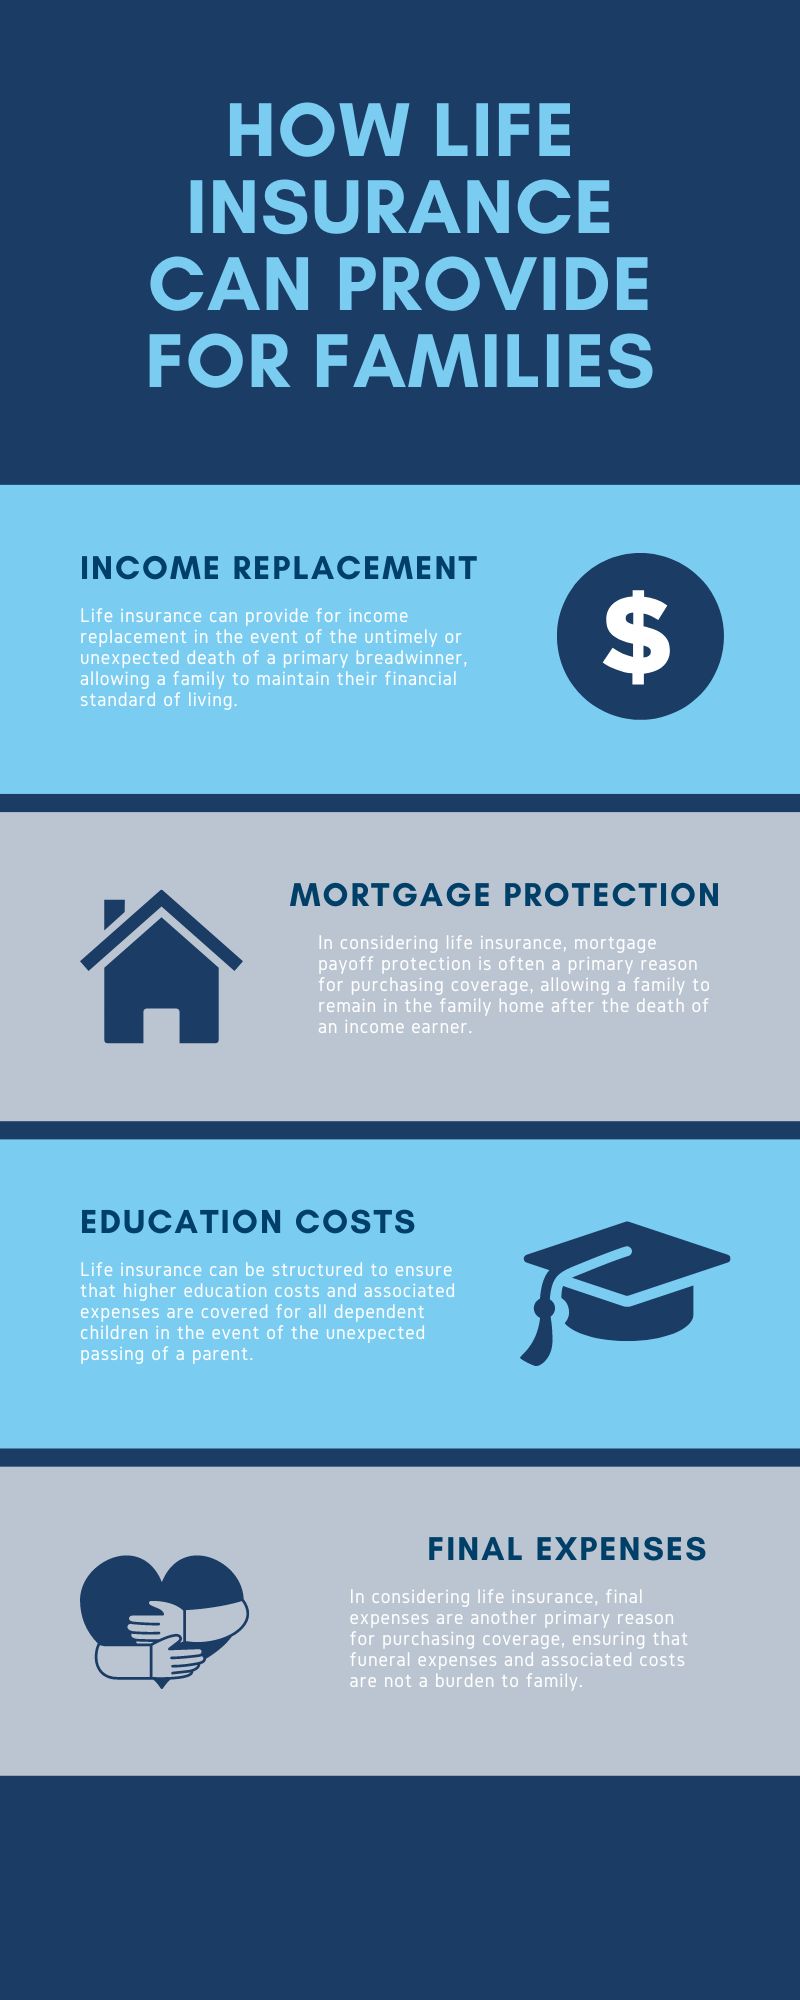 How Life Insurance Can Provide for Families infographic